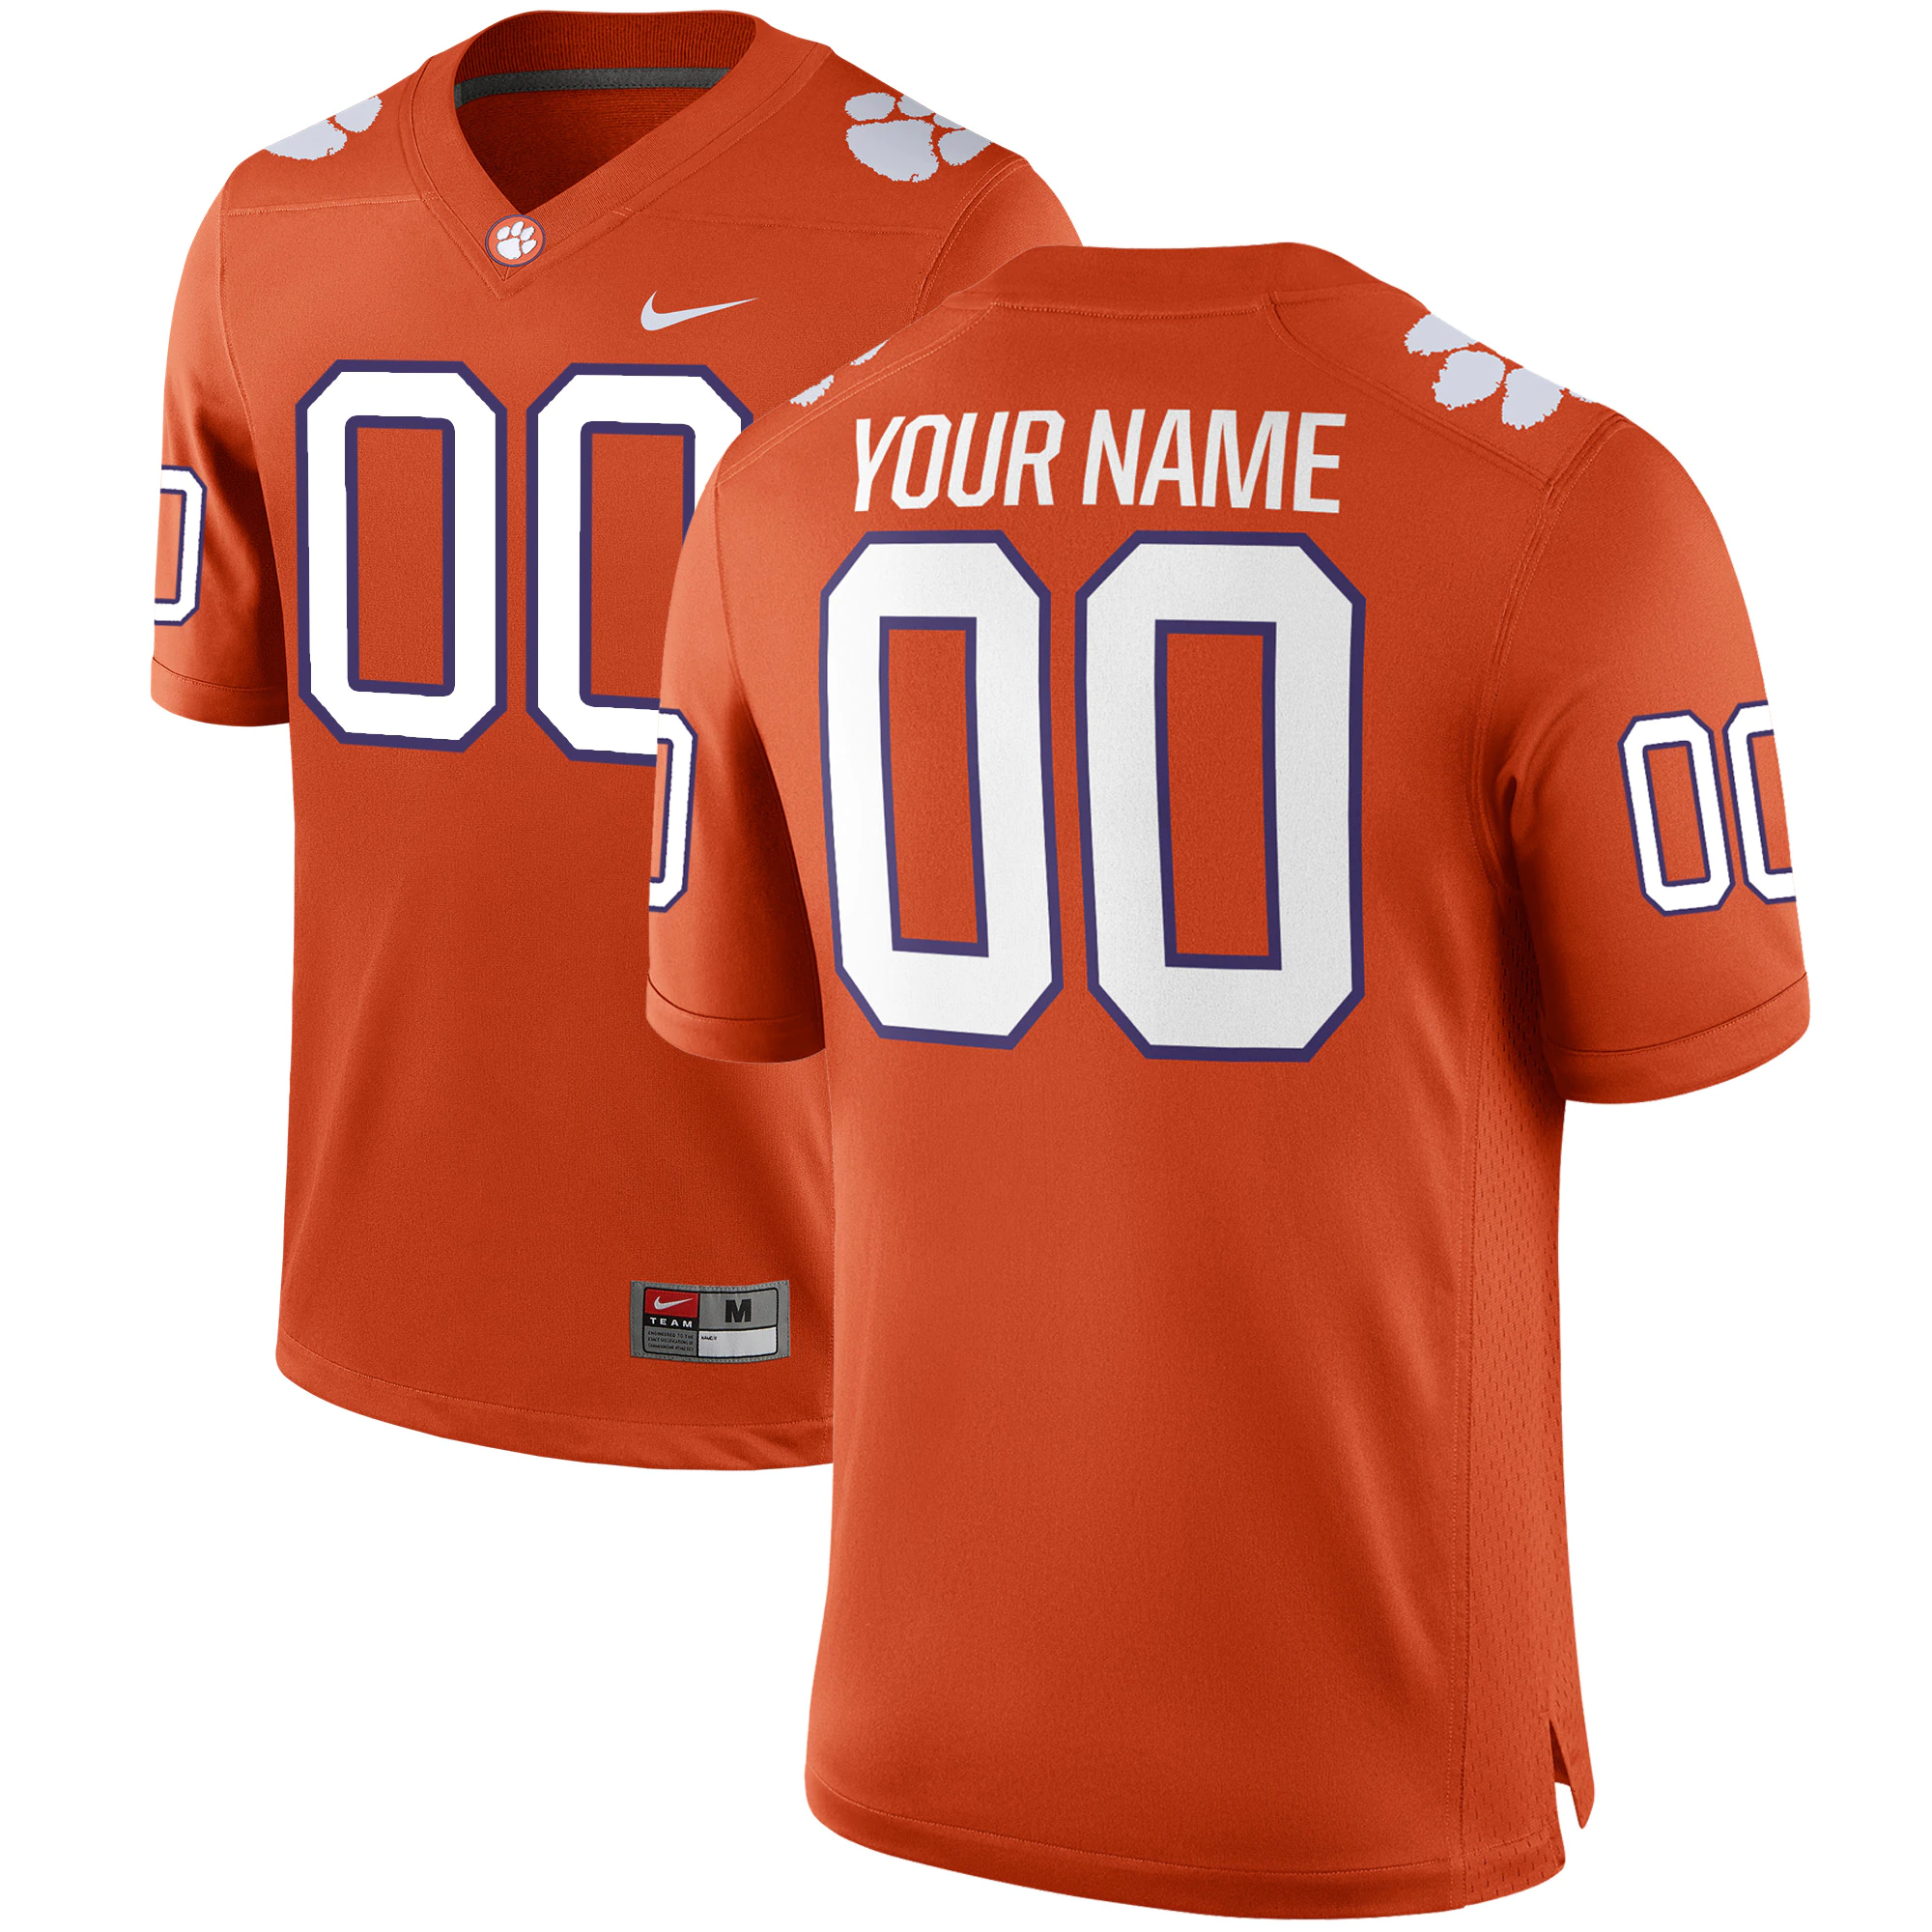 Customisable Football Jerseys: Personalize Your Style on the Field